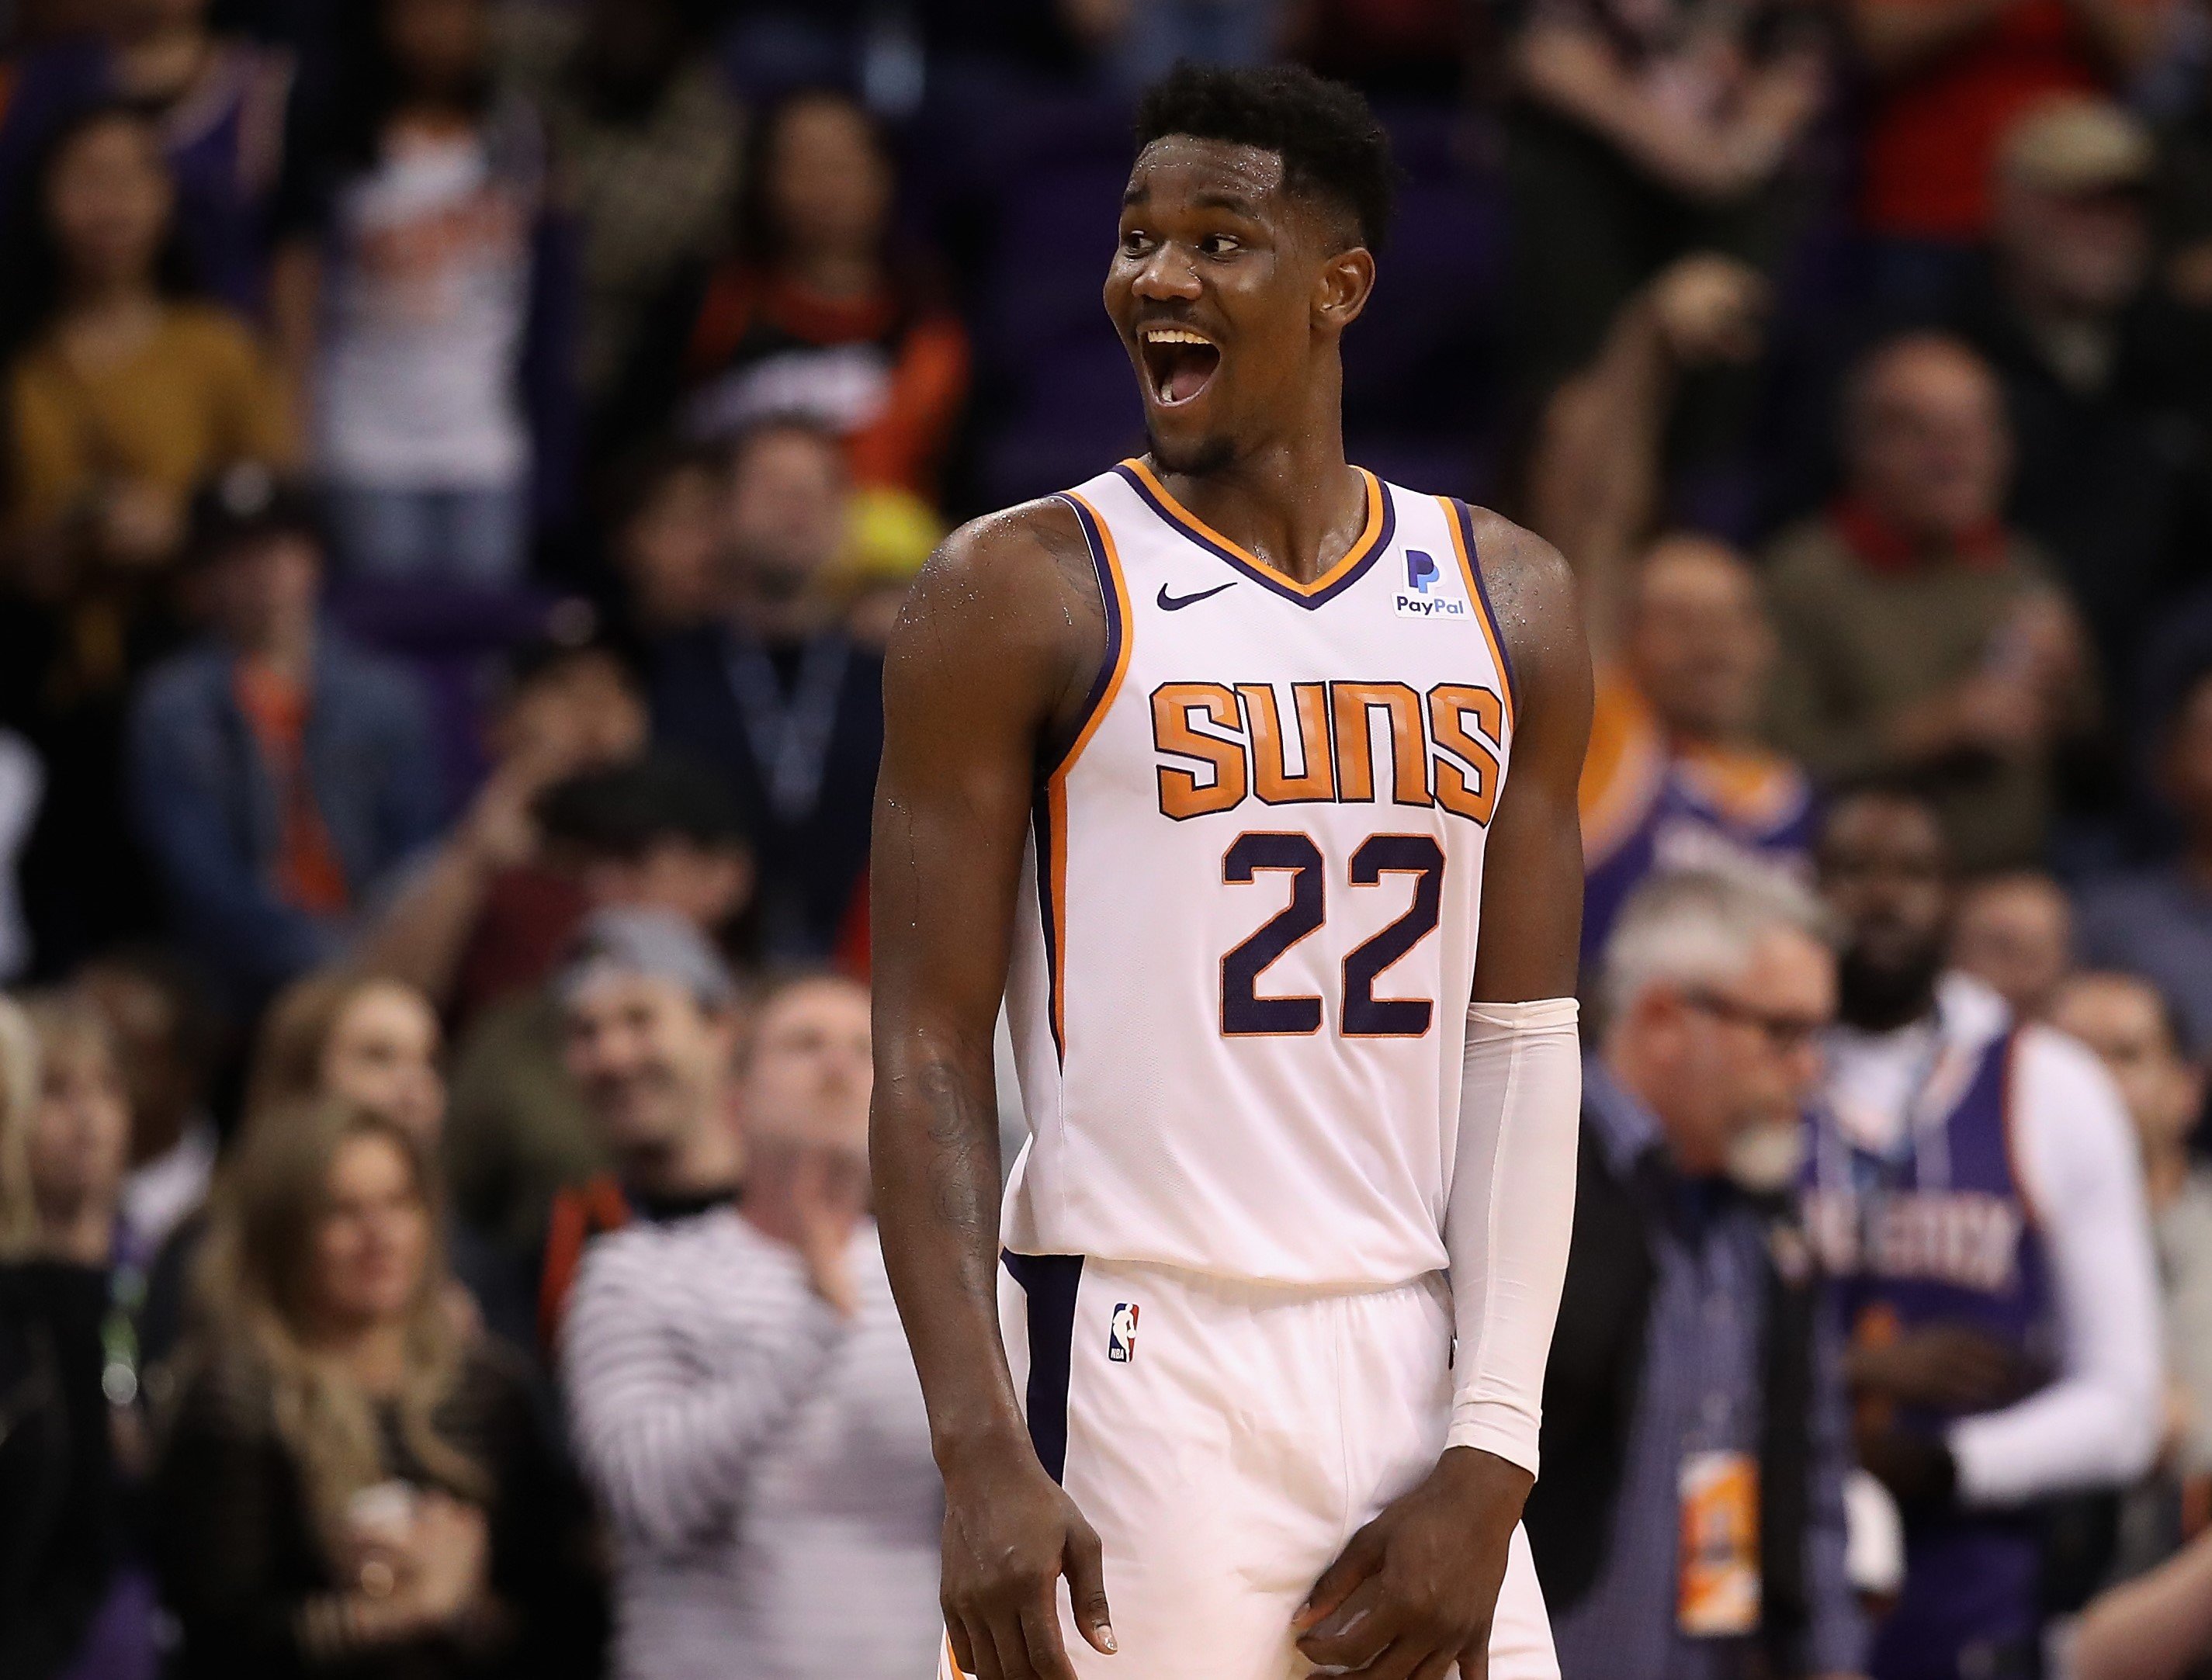 Deandre Ayton smiling during the final moments of the NBA game against the Milwaukee Bucks